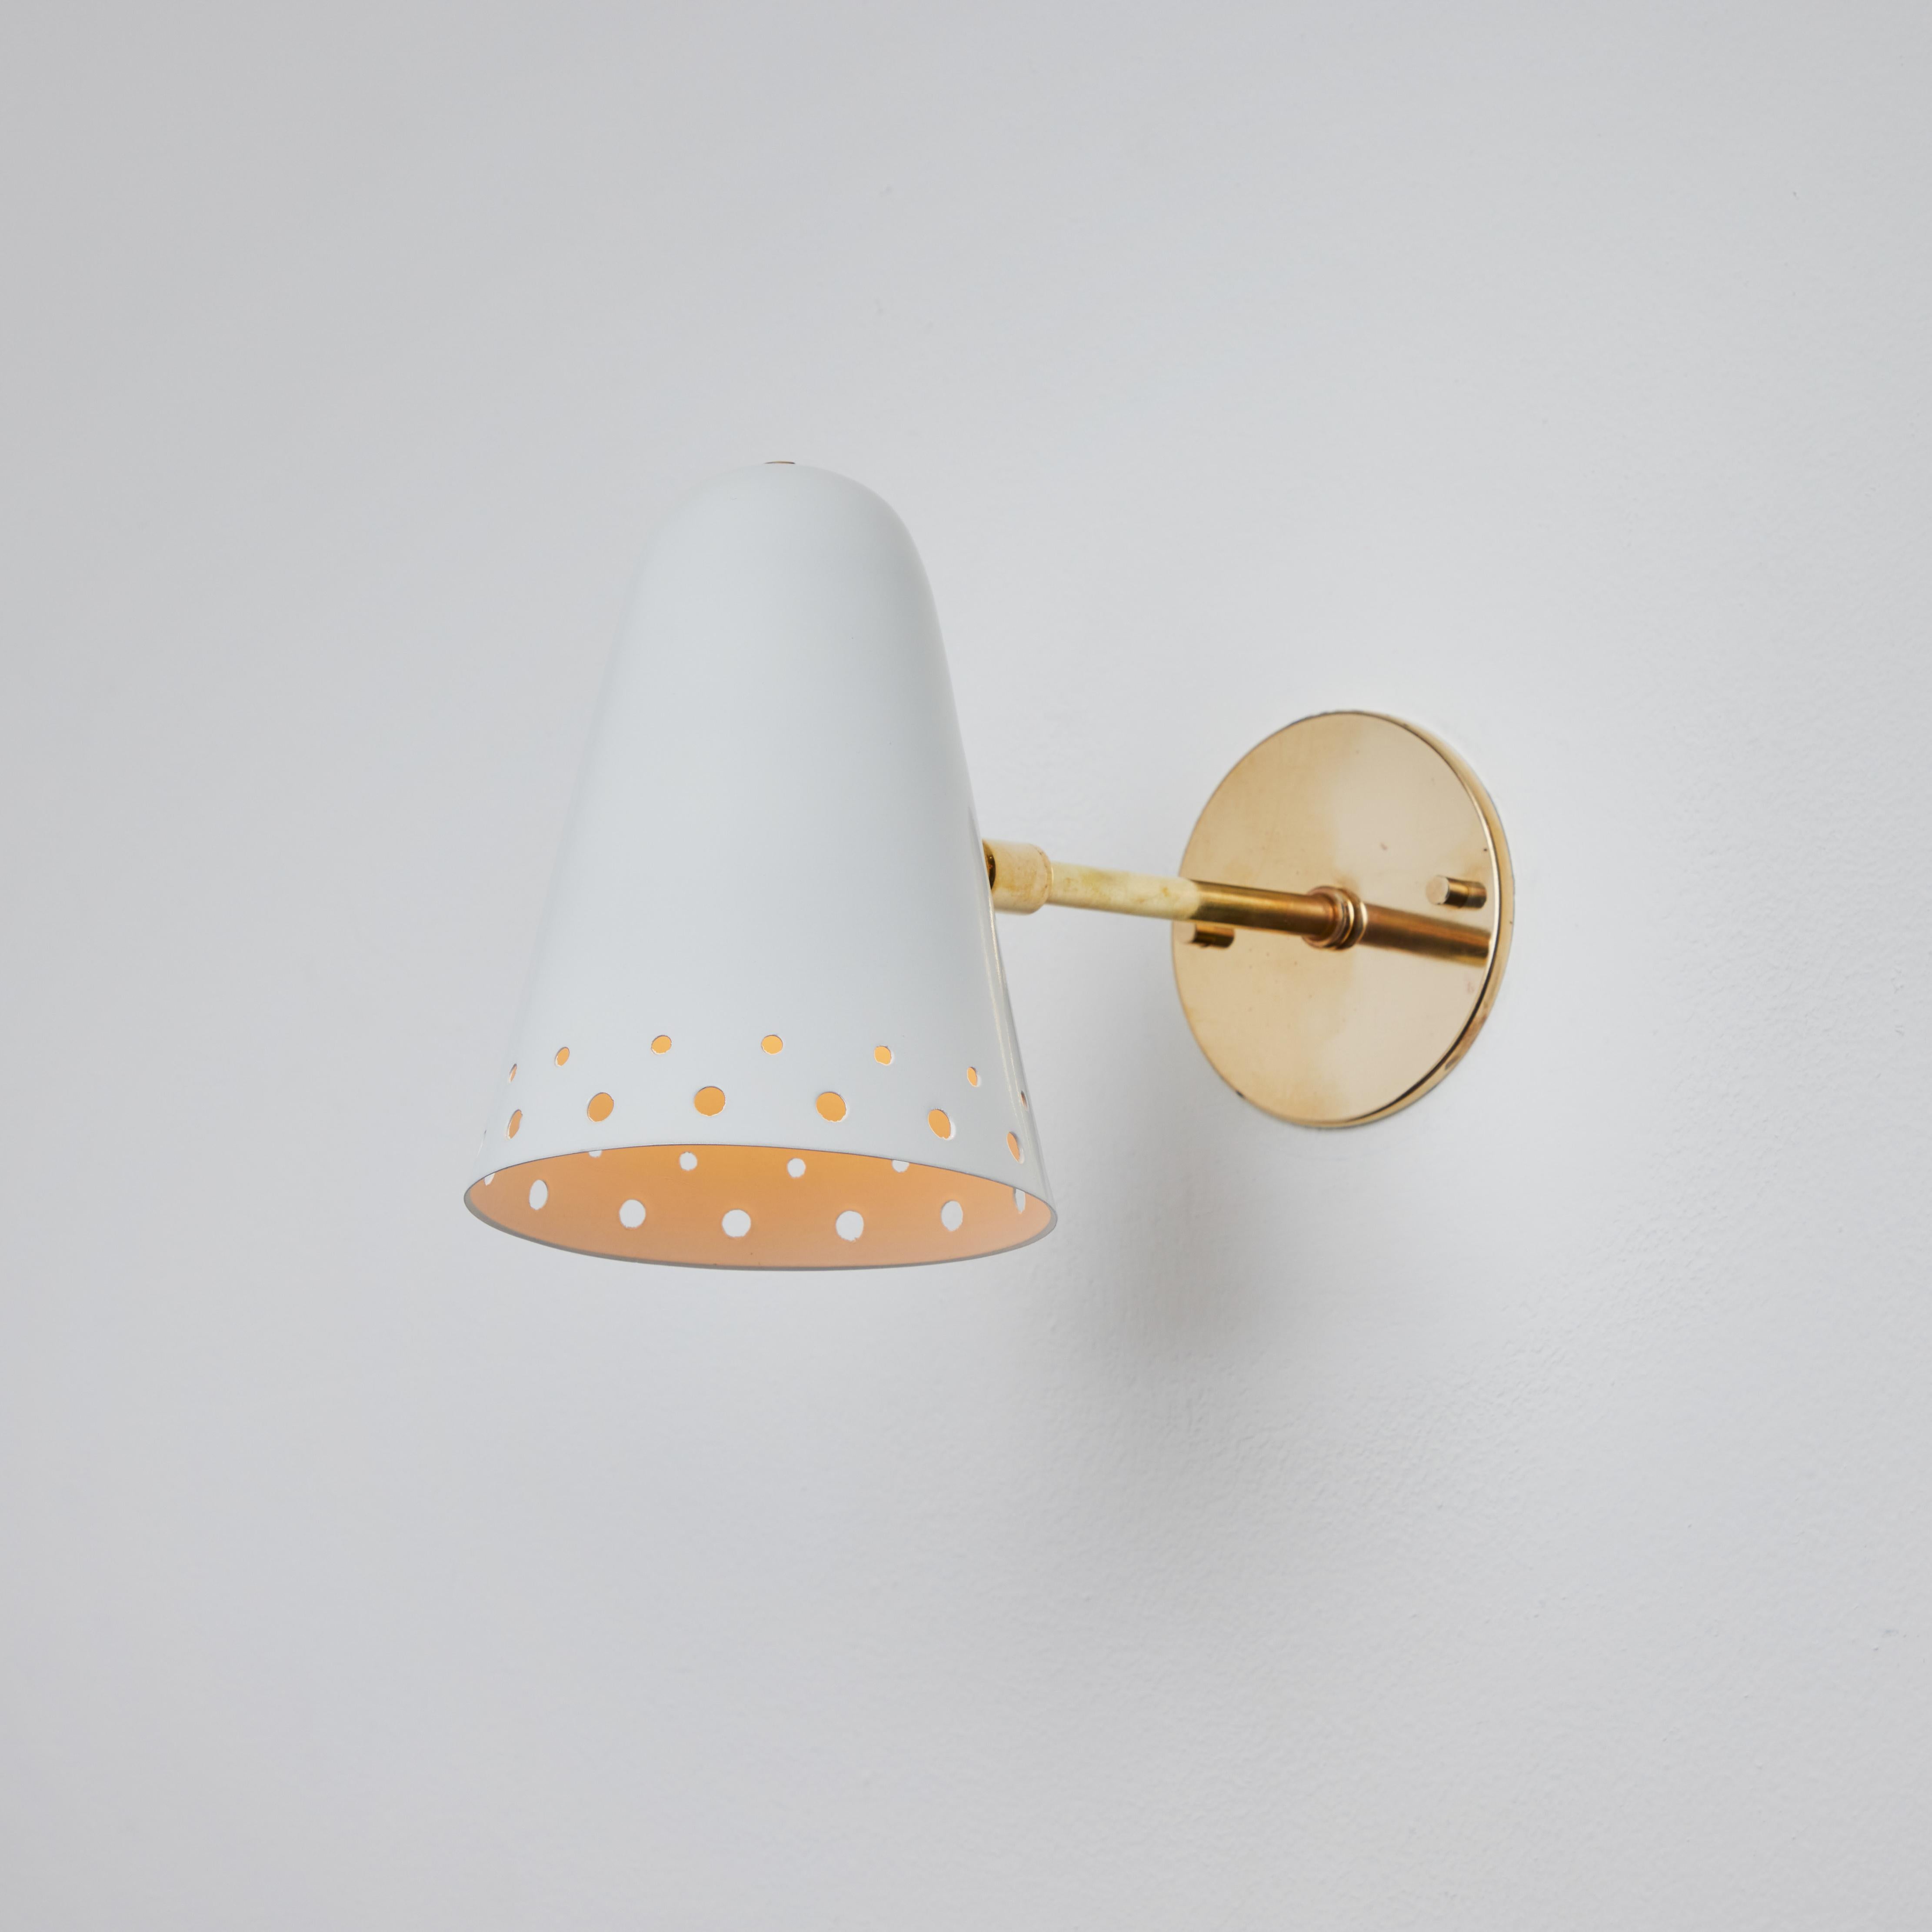 Rare 1950s Robert Mathieu perforated white metal and brass wall sconce. Executed in perforated white painted metal with custom period-style polished brass hardware and backplate. A clean yet functional wall lamp highly indicative of the iconic